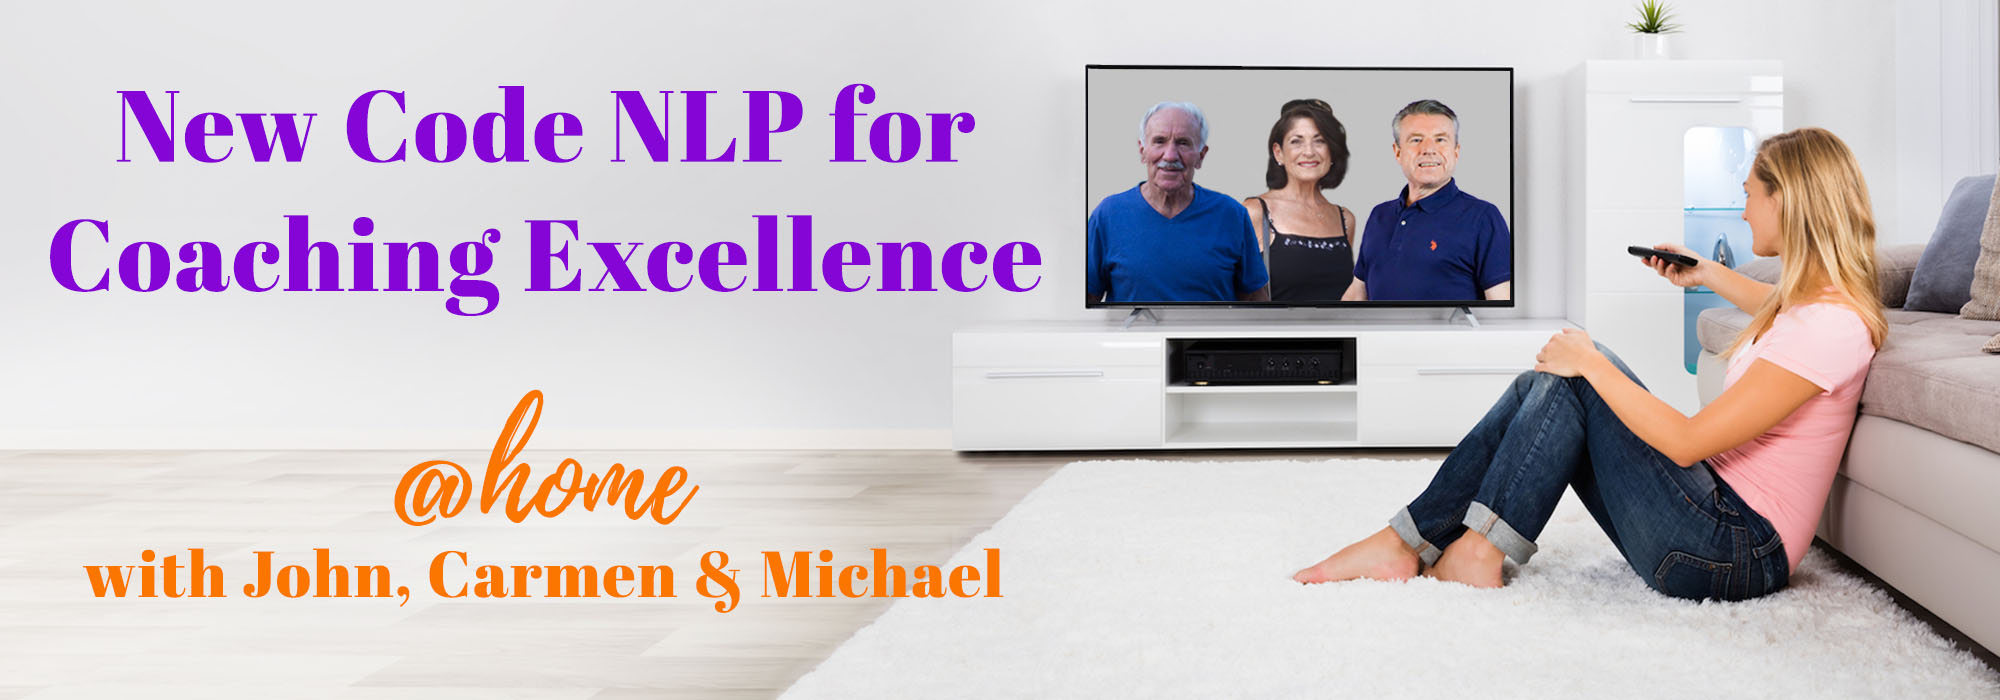 New Code NLP for Coaching Excellence